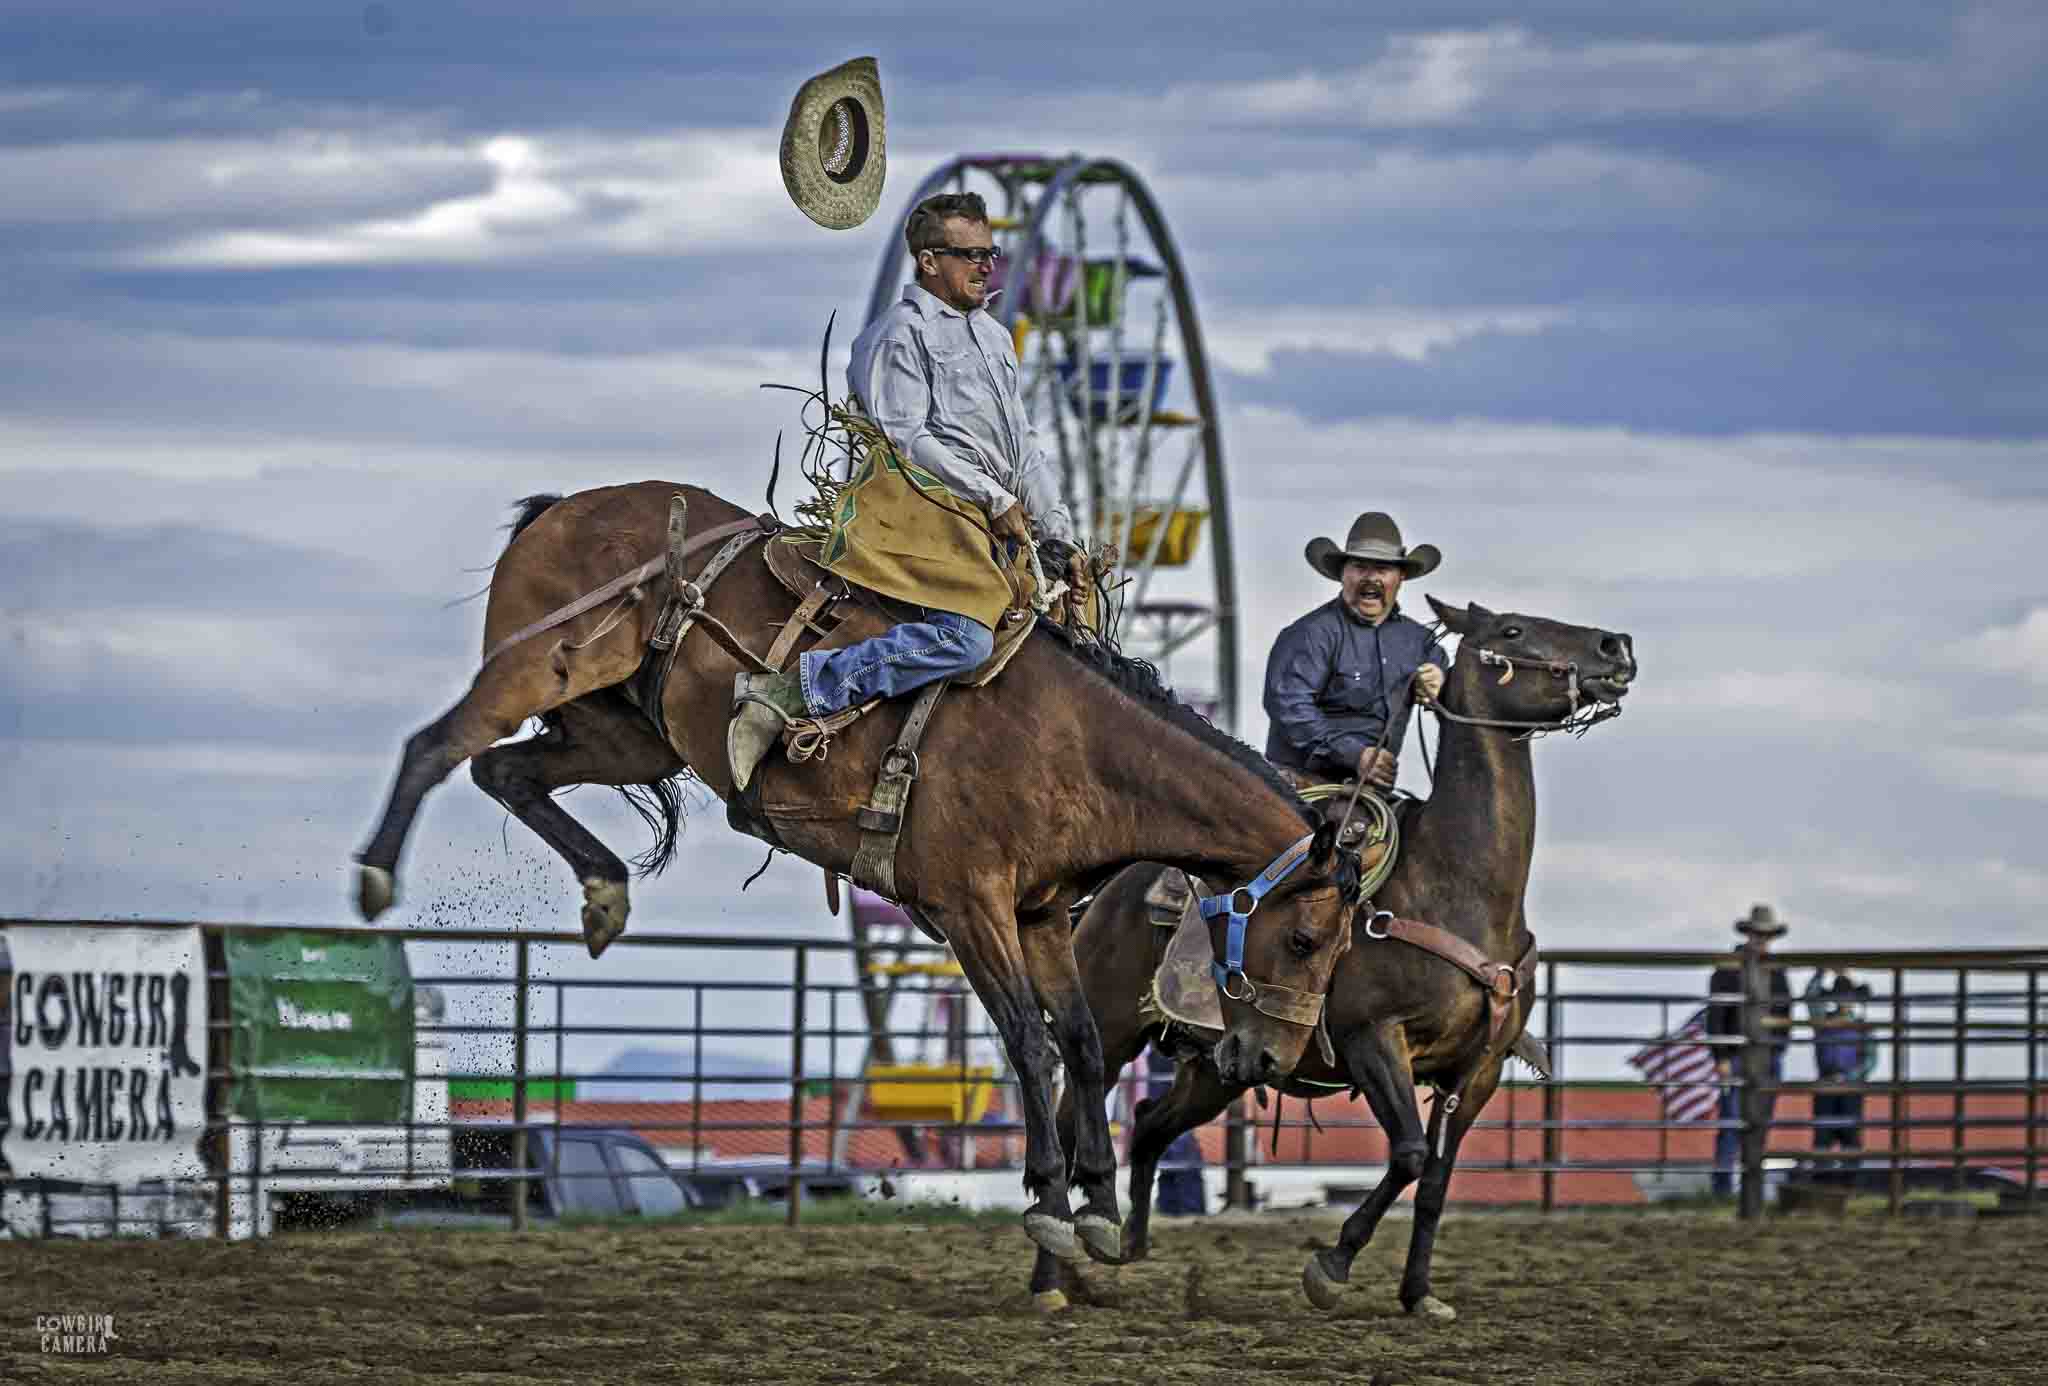 Bronc bucking in front of a ferris wheel with a pickup man nearby